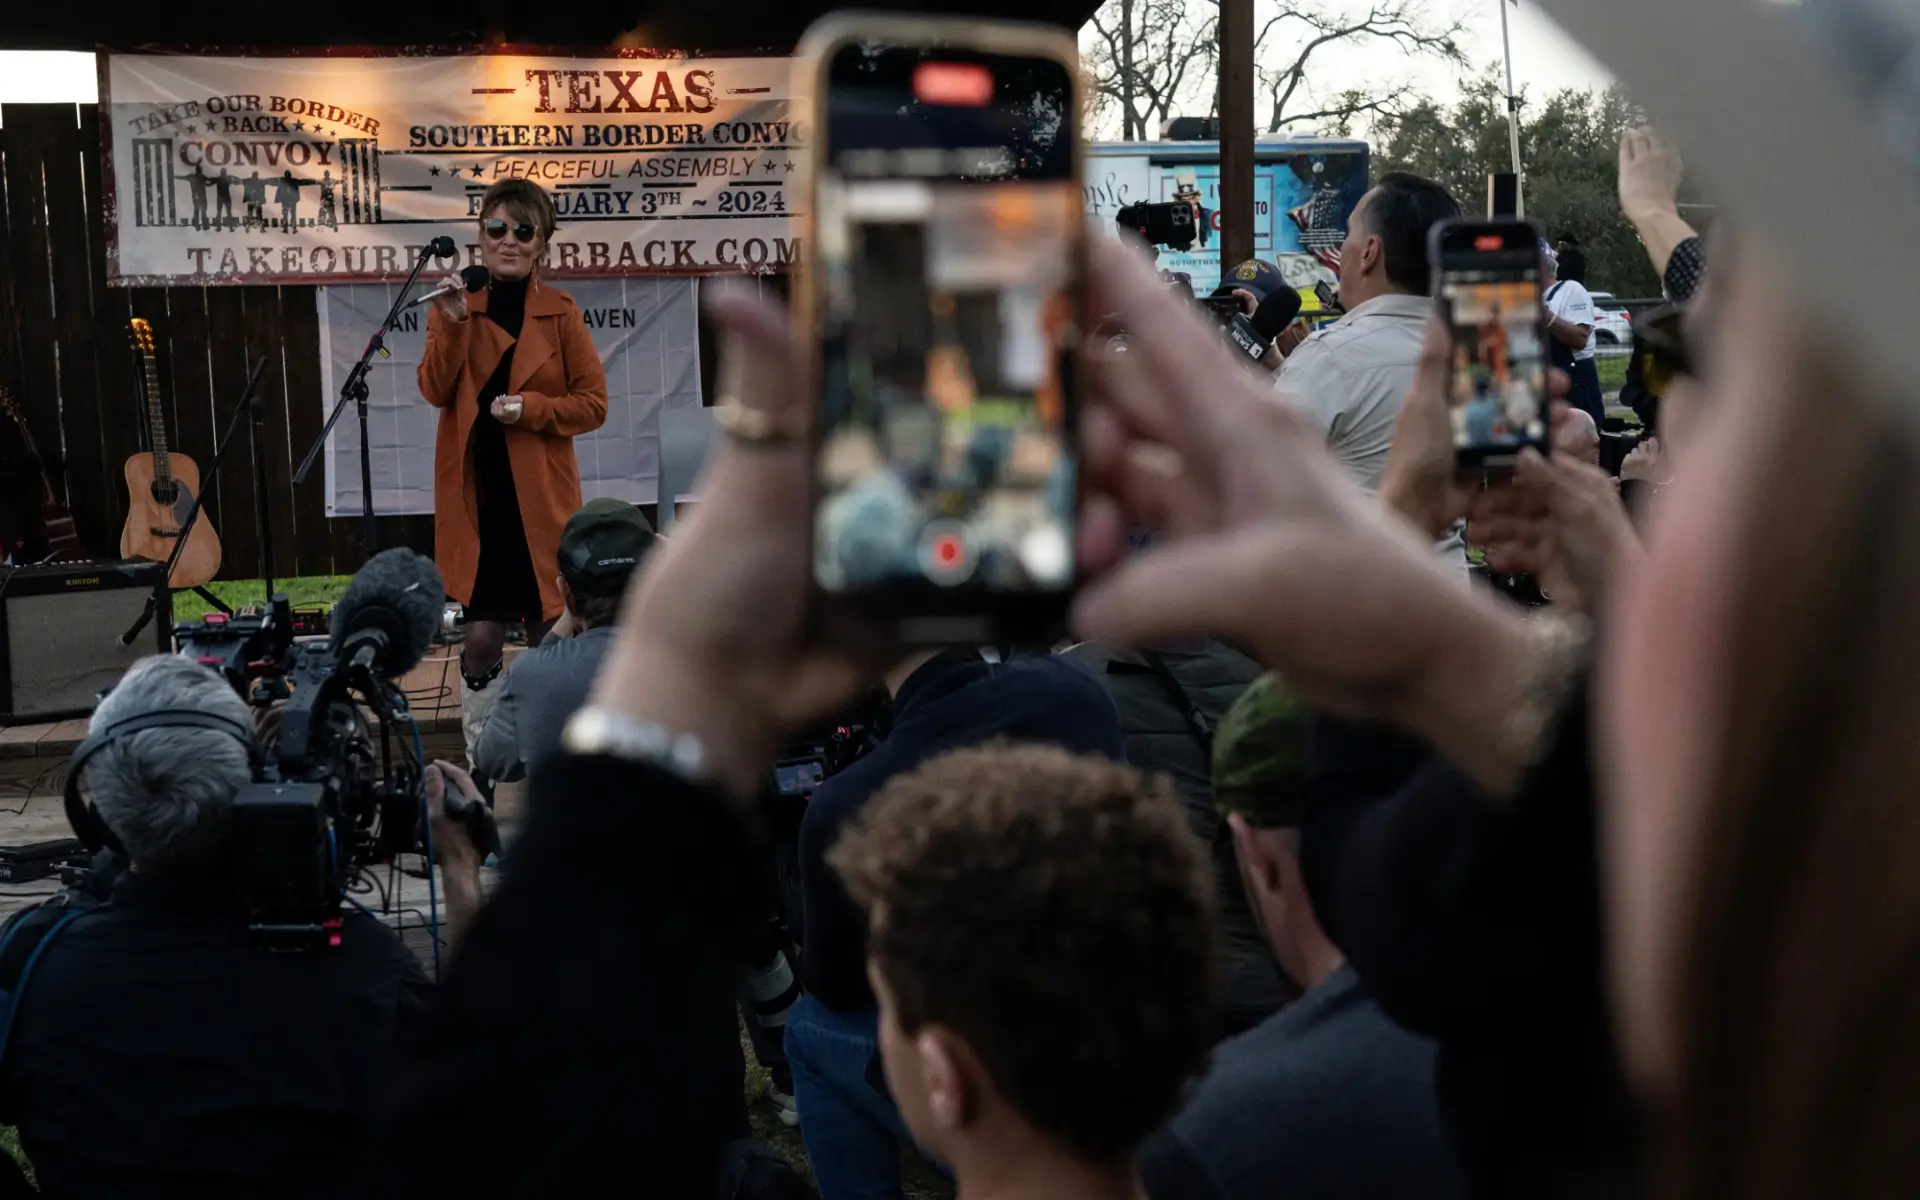 Texas Border Rally: A Stand Against Illegal Immigration